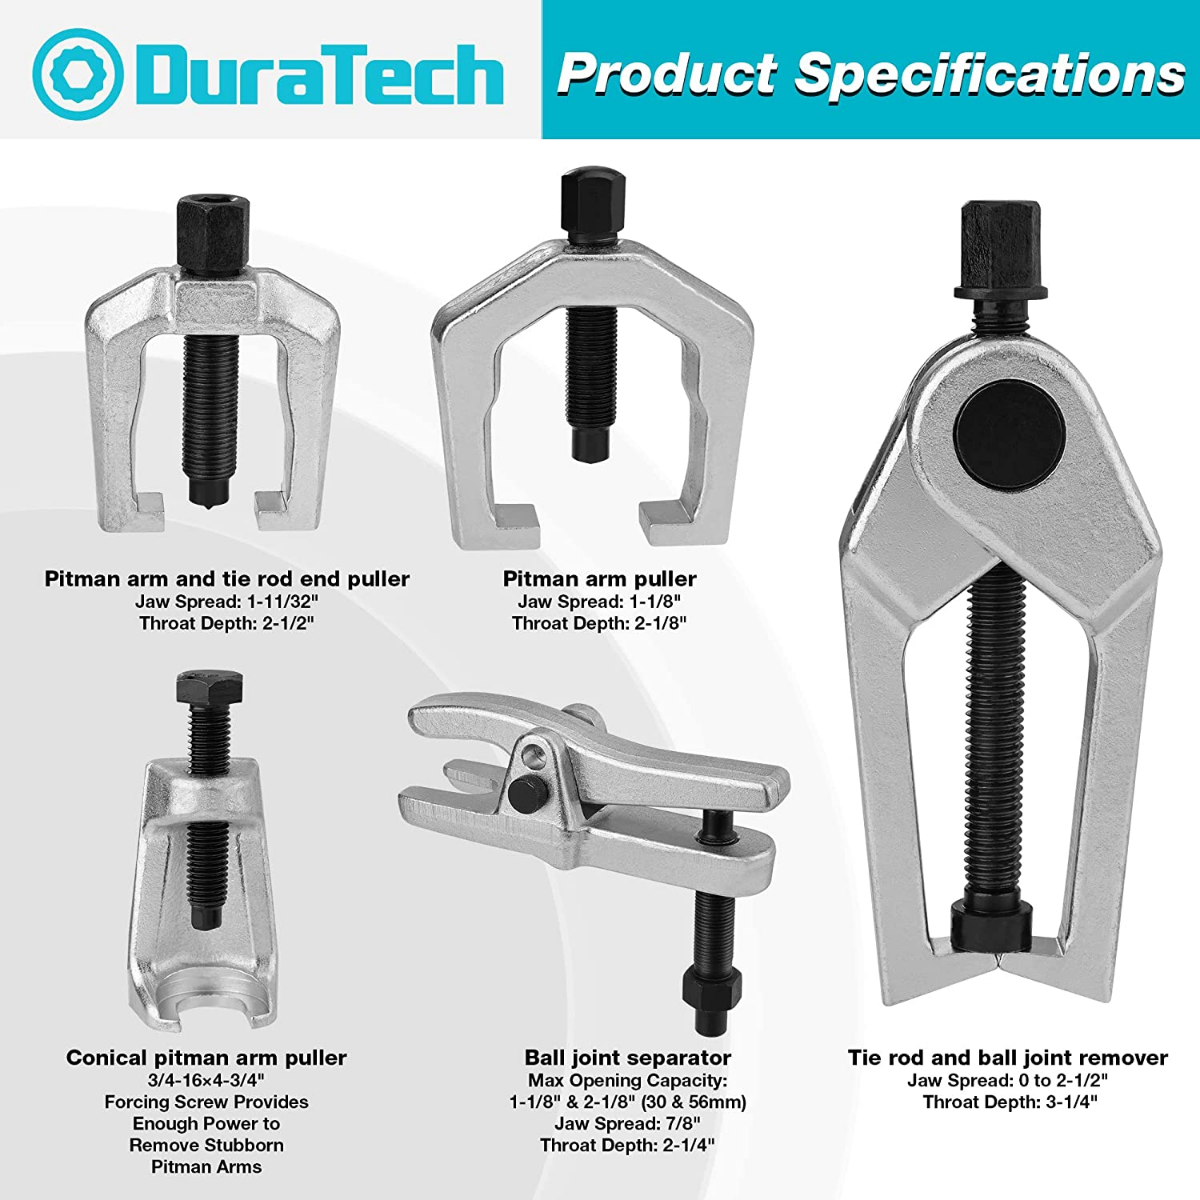 DURATECH 5-Piece Ball Joint Separator, Pitman Arm Puller, Tie Rod End